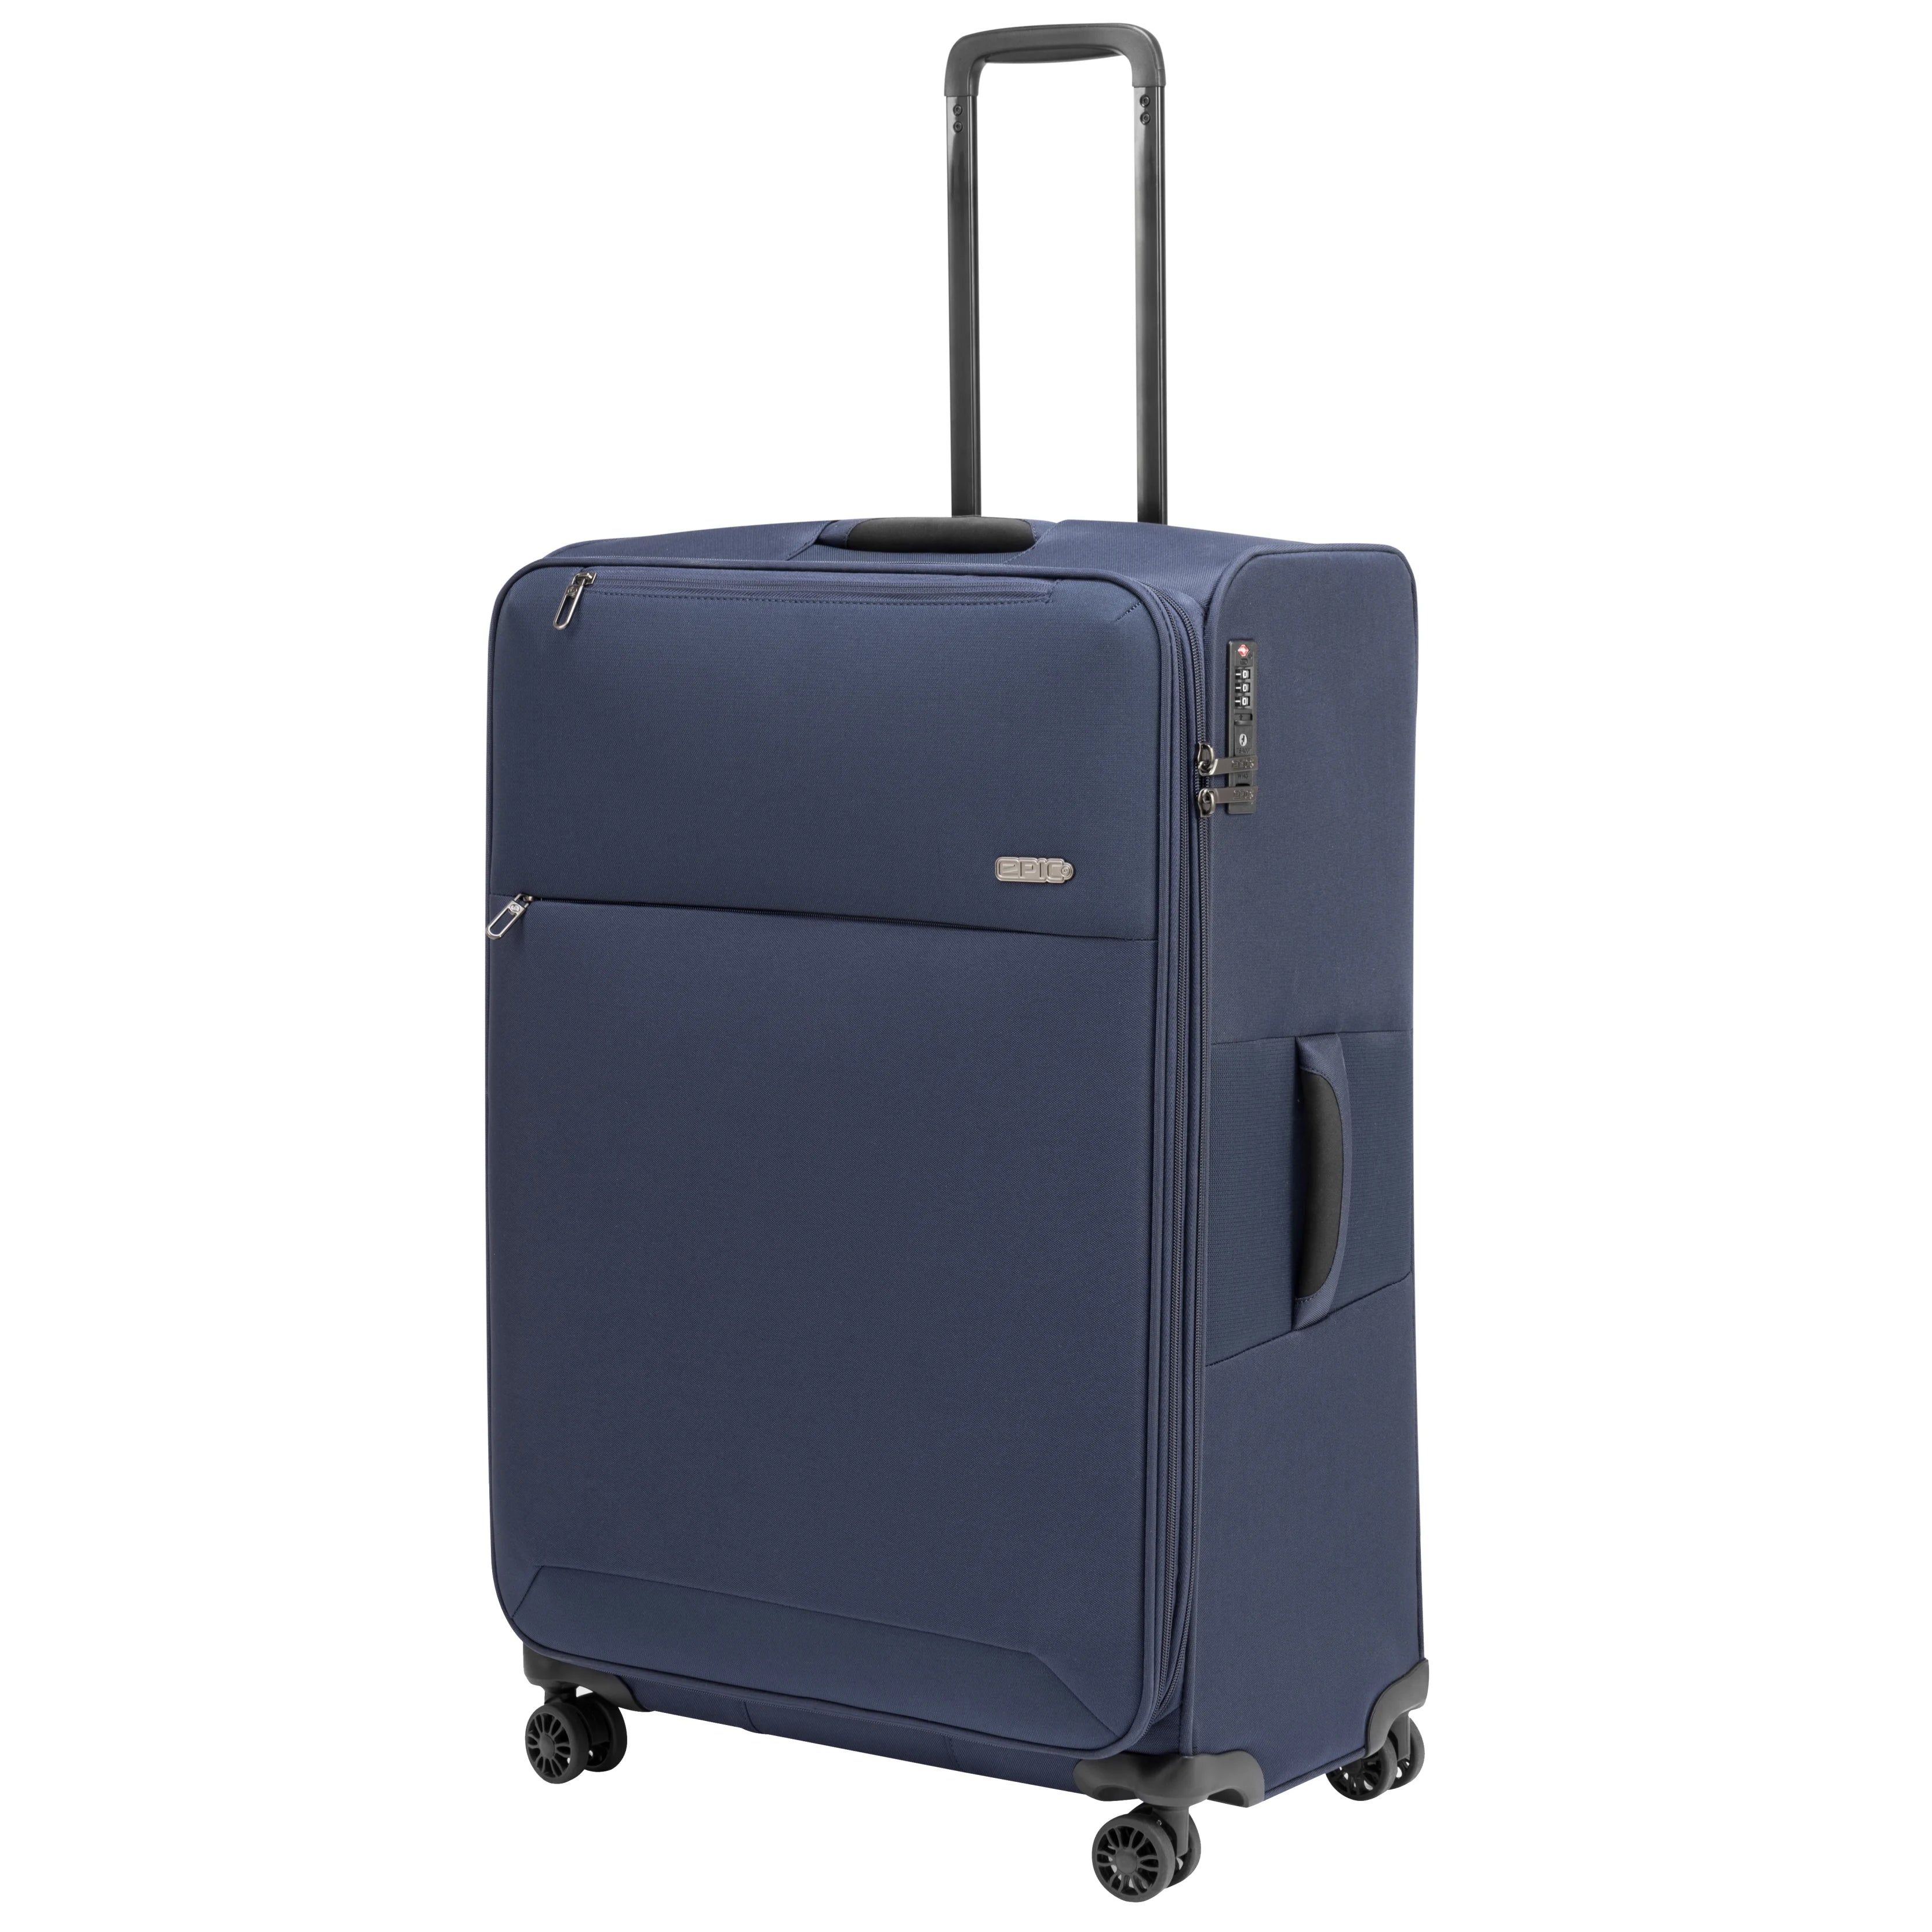 Epic Discovery Neo 4-Rollen Trolley 77 cm - navy blue